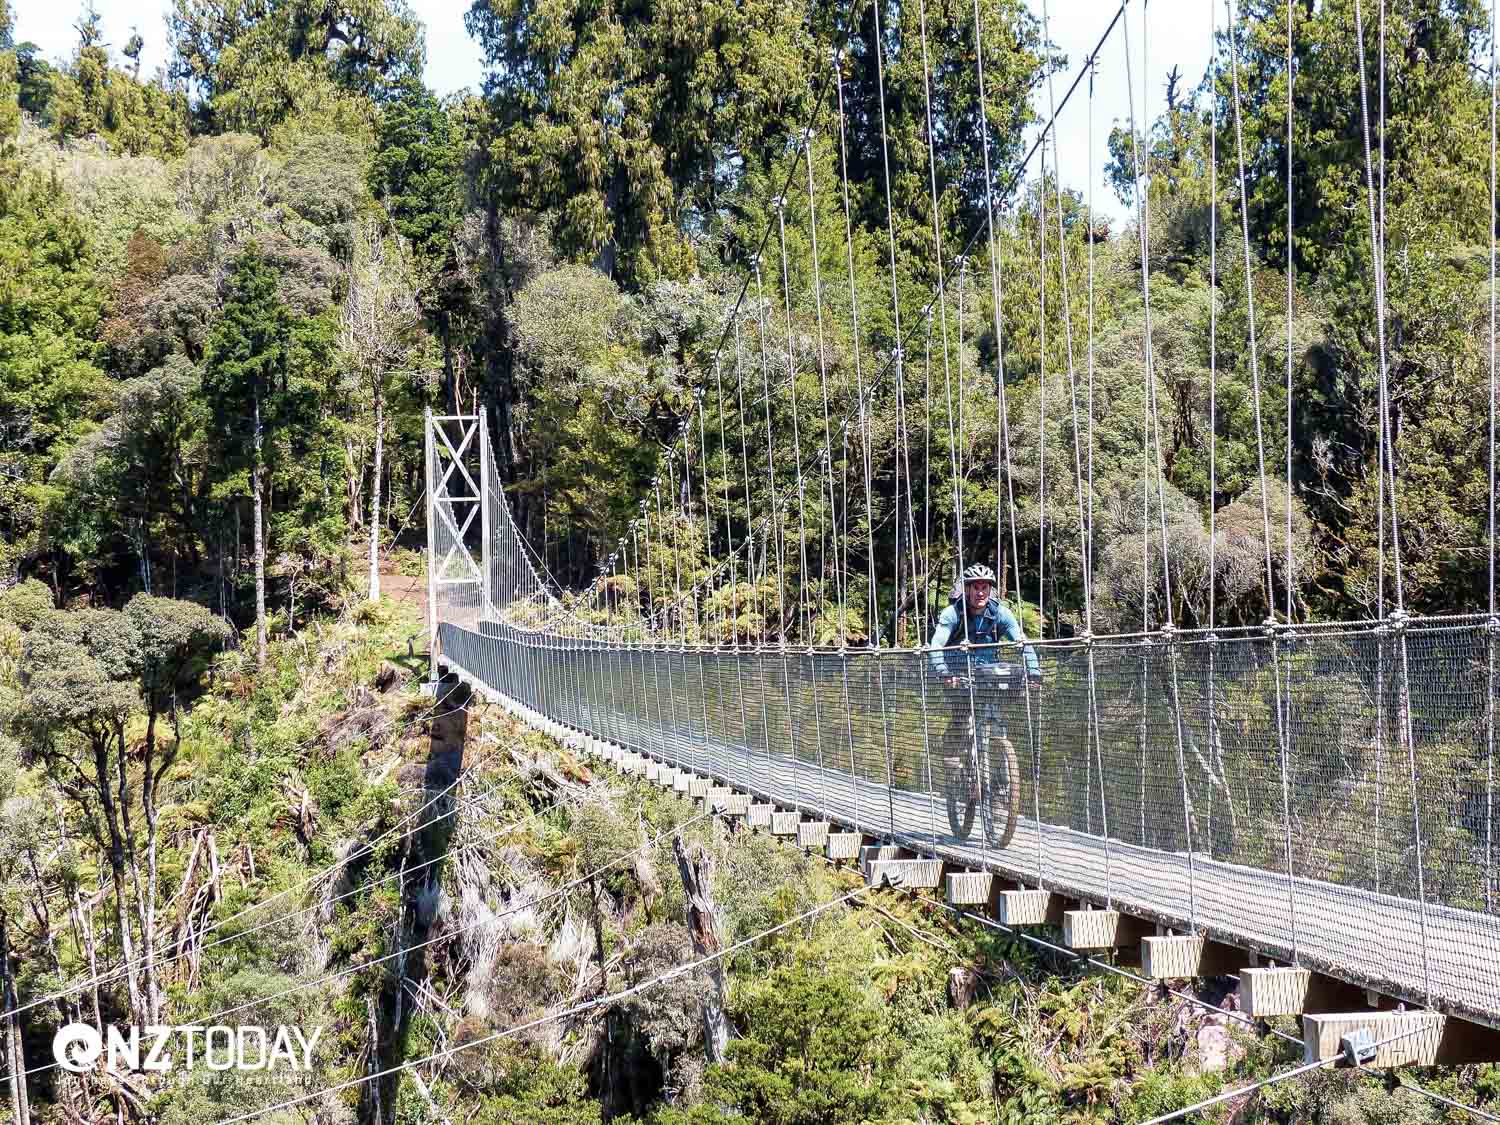 The massive suspension bridges on this trail were both stunning and daunting